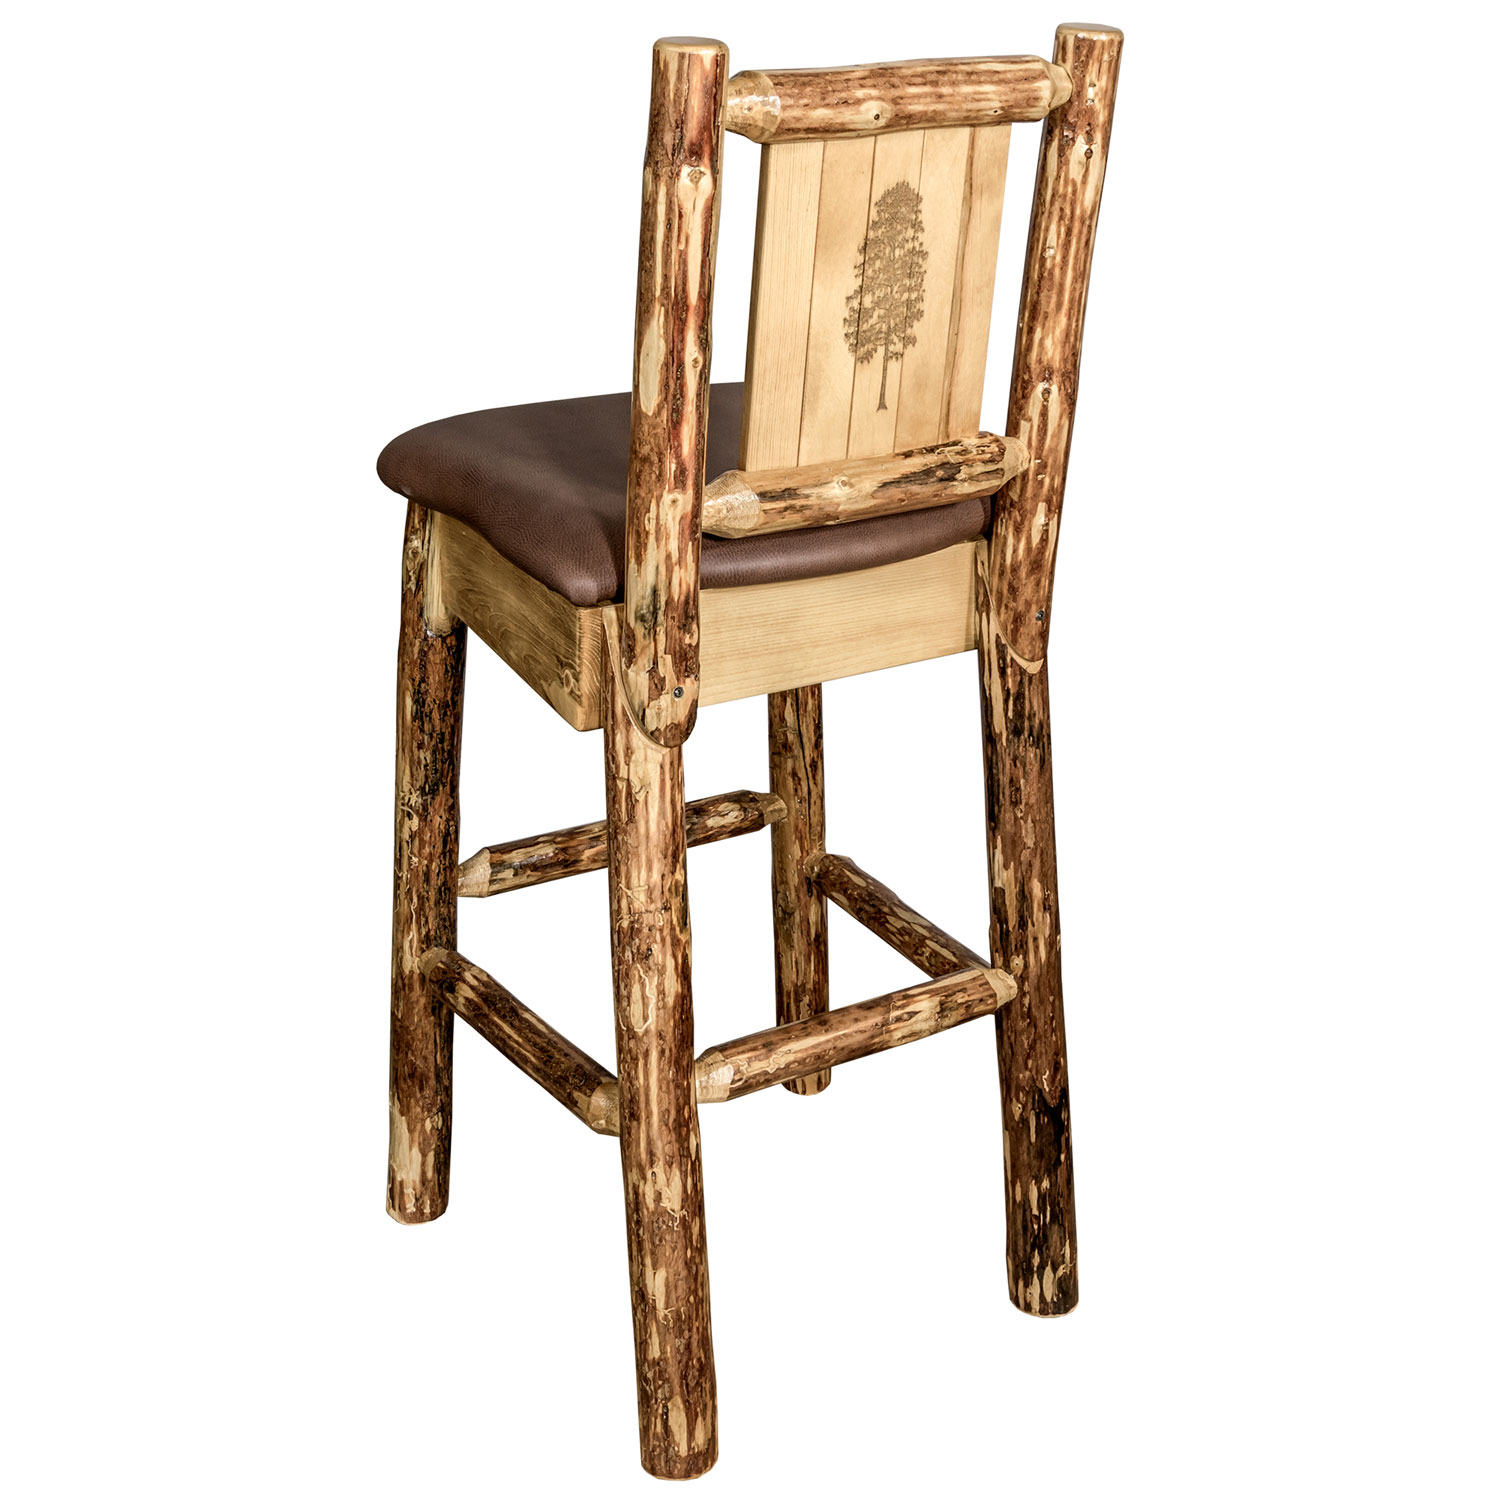 Glacier Country Barstool With Back - Saddle Upholstery, With Laser Engraved Pine Tree Design